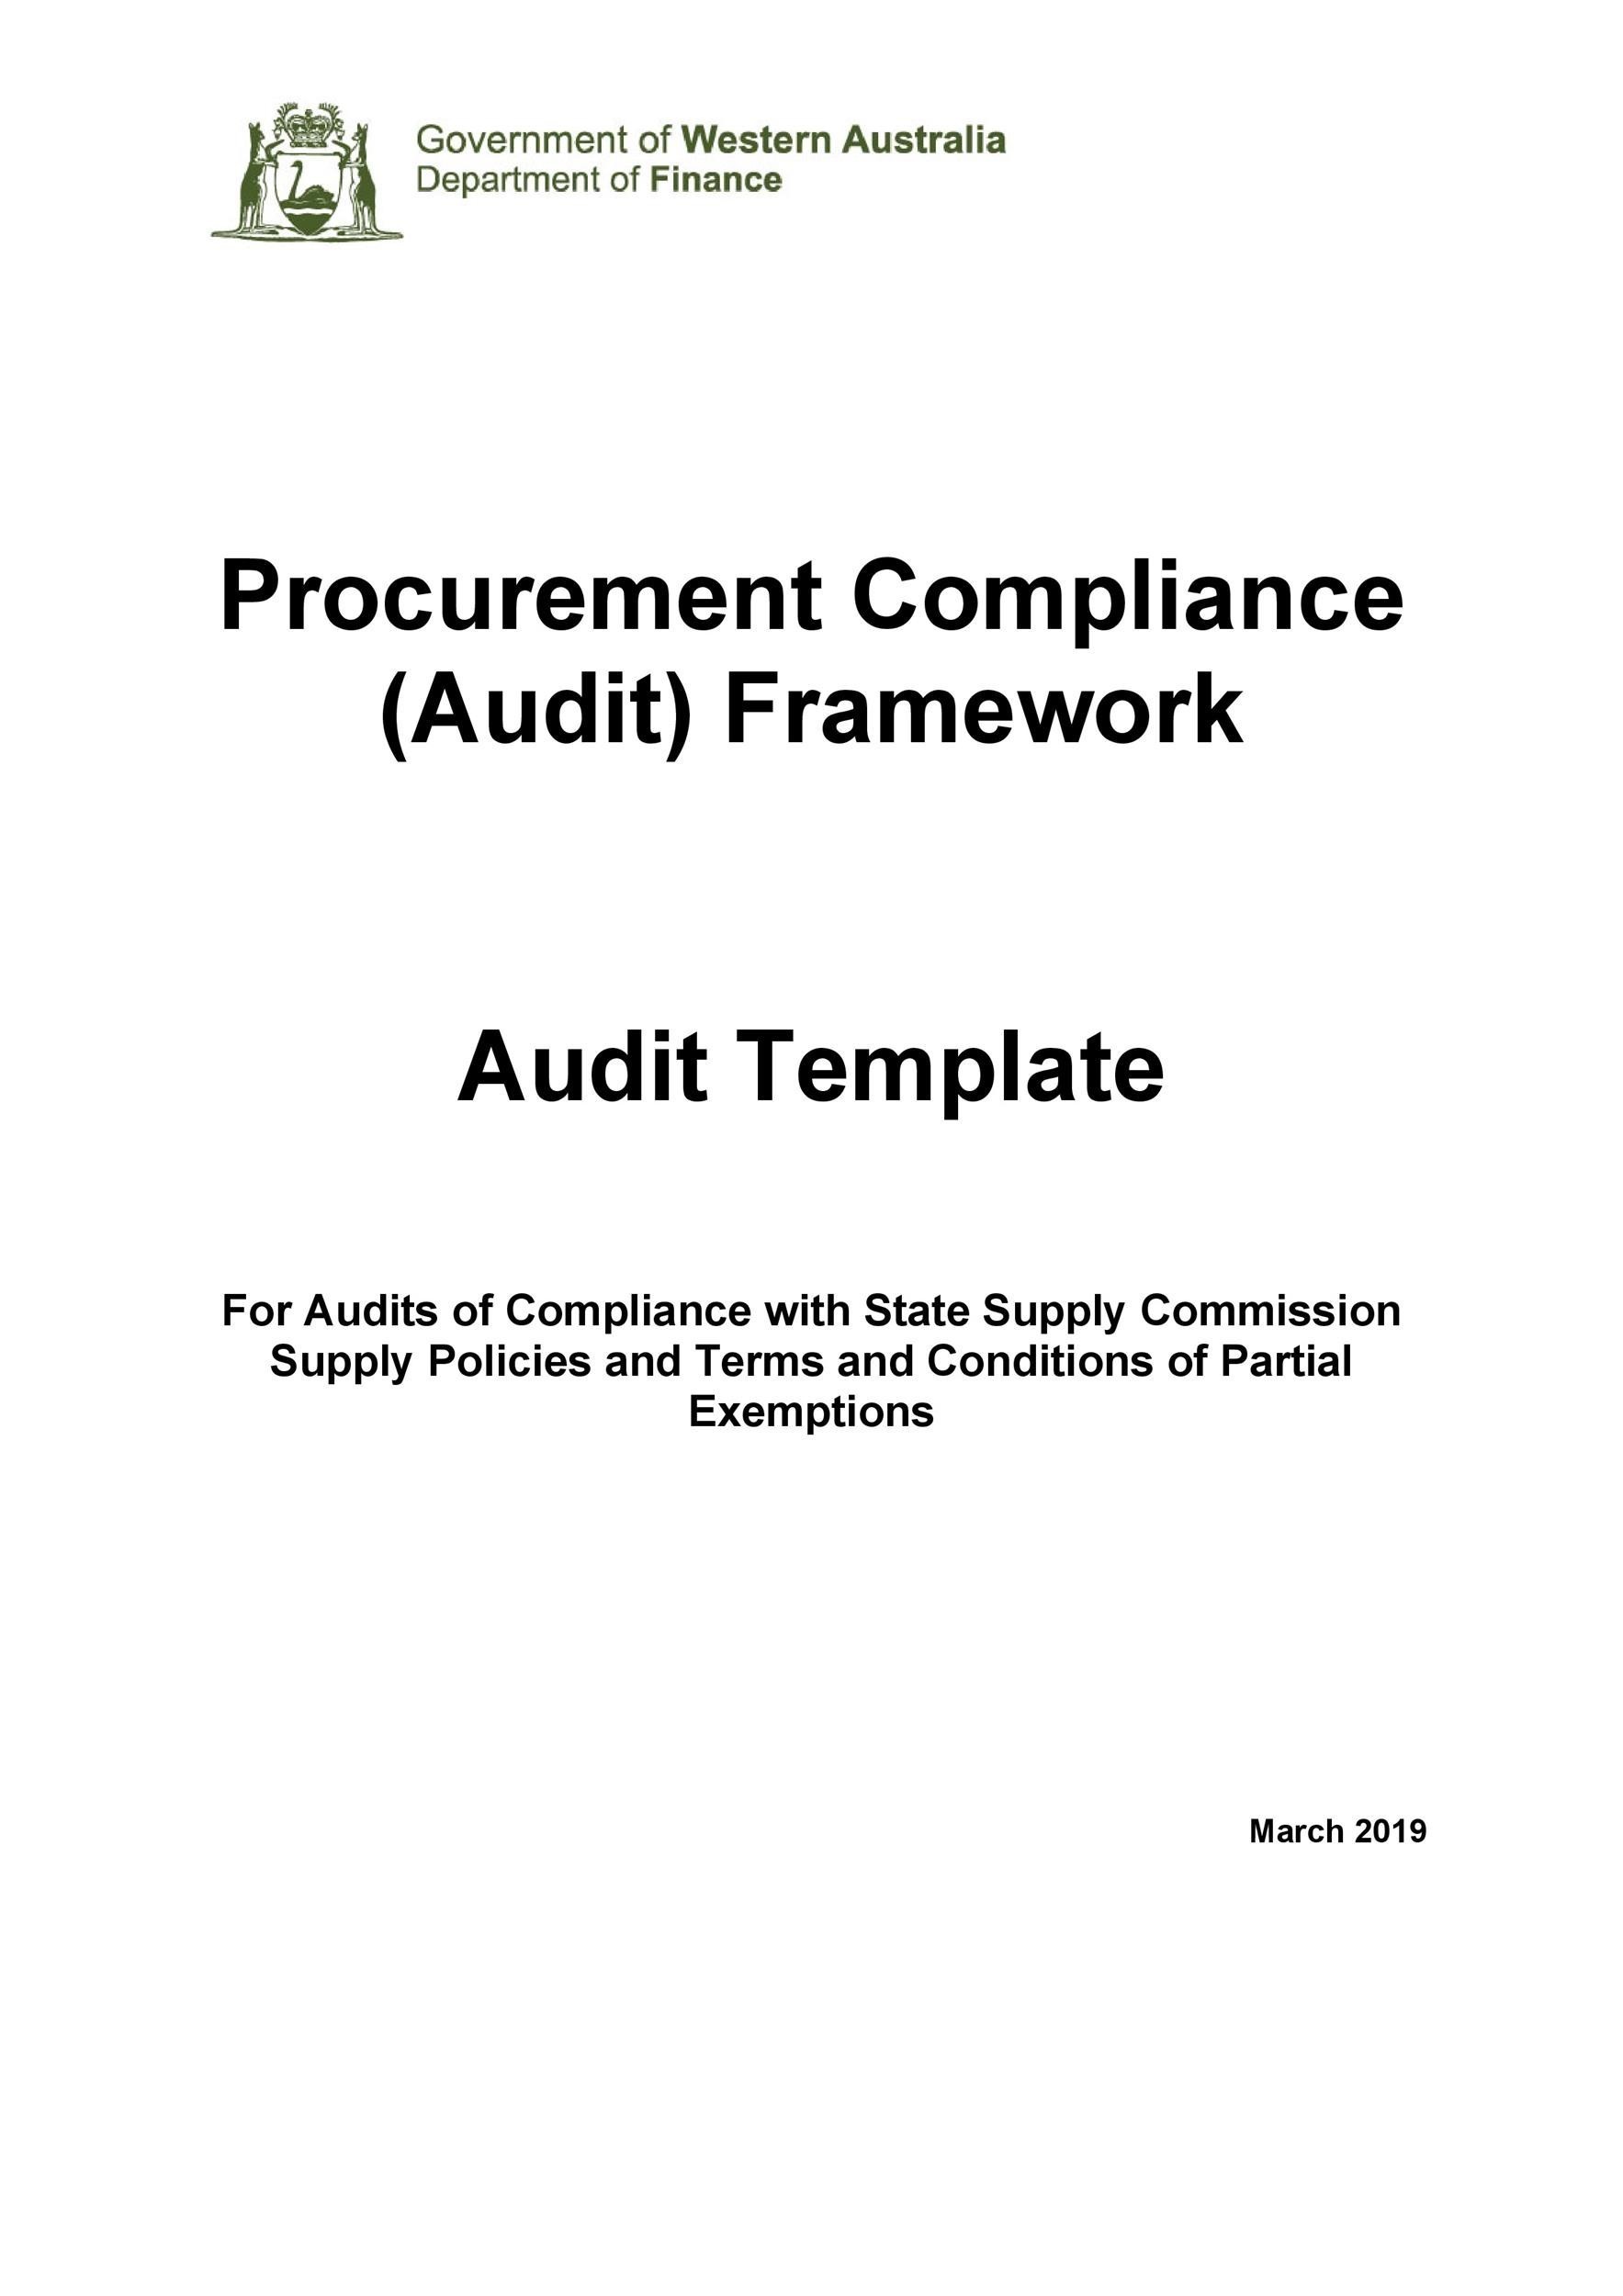 Free audit report template 36